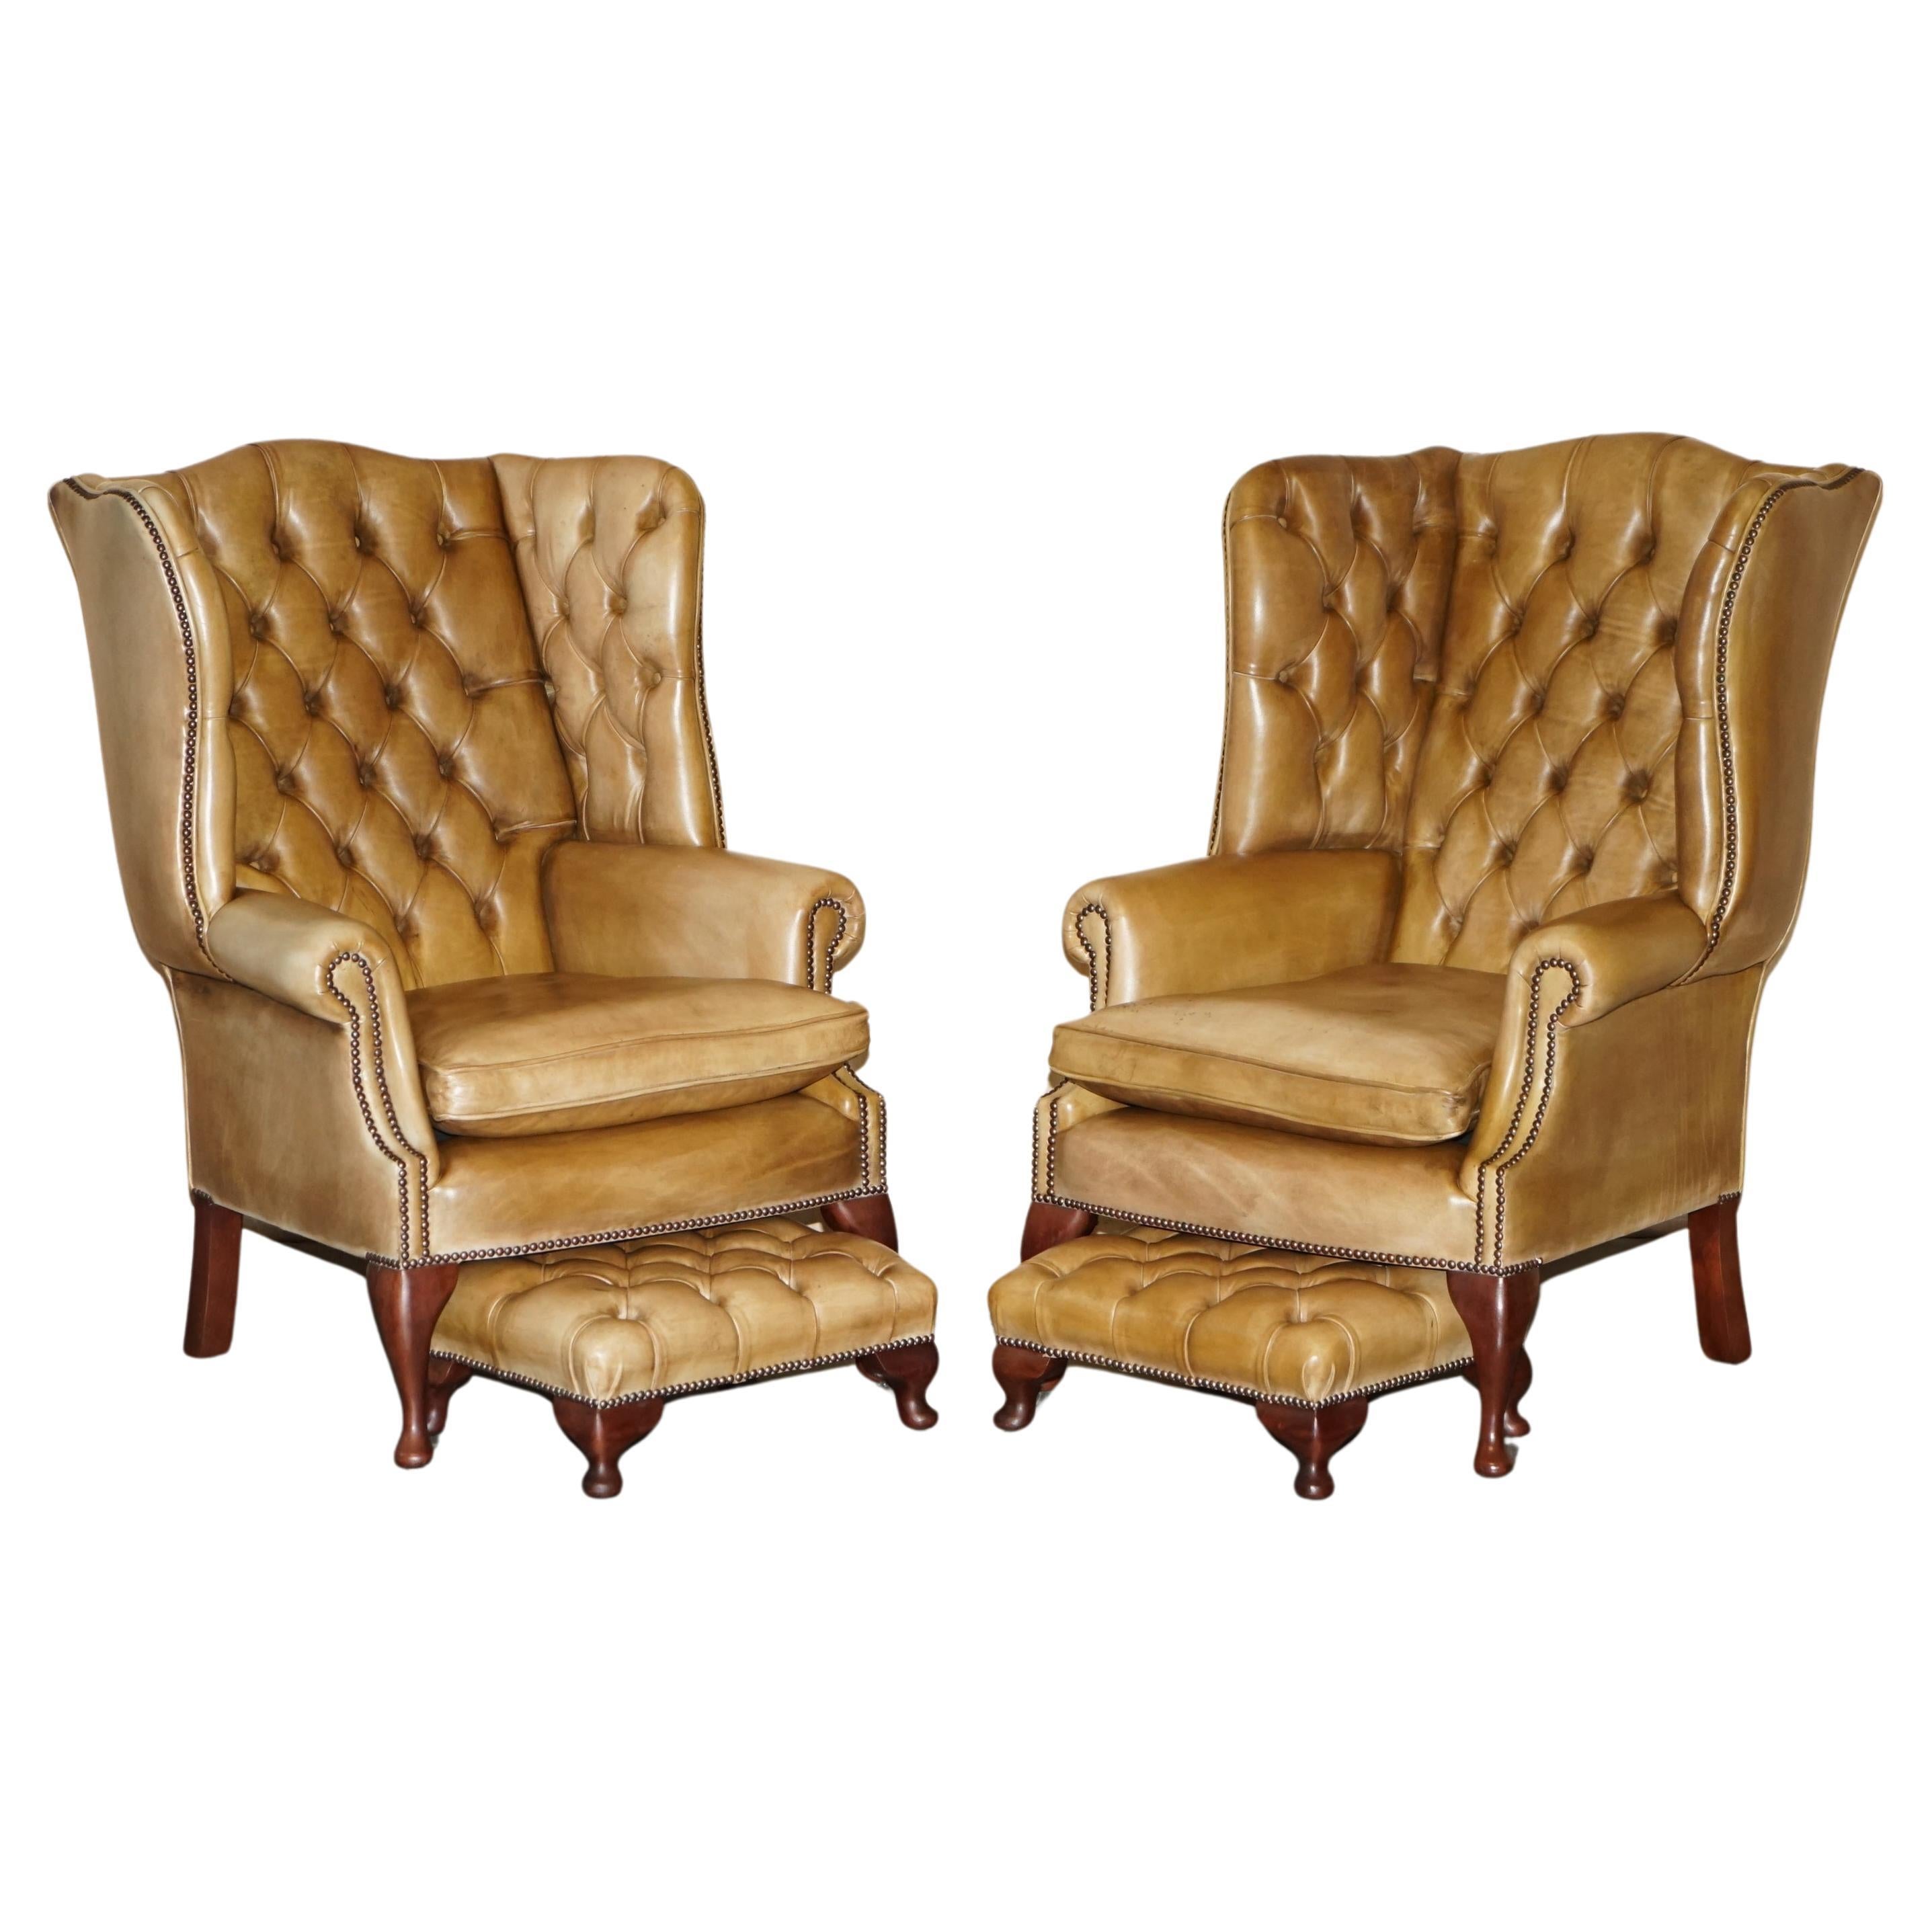 PAIR OF VINTAGE TAN BROWN LEATHER CHESTERFiELD WINGBACK CHAIRS WITH FOOTSTOOLS For Sale